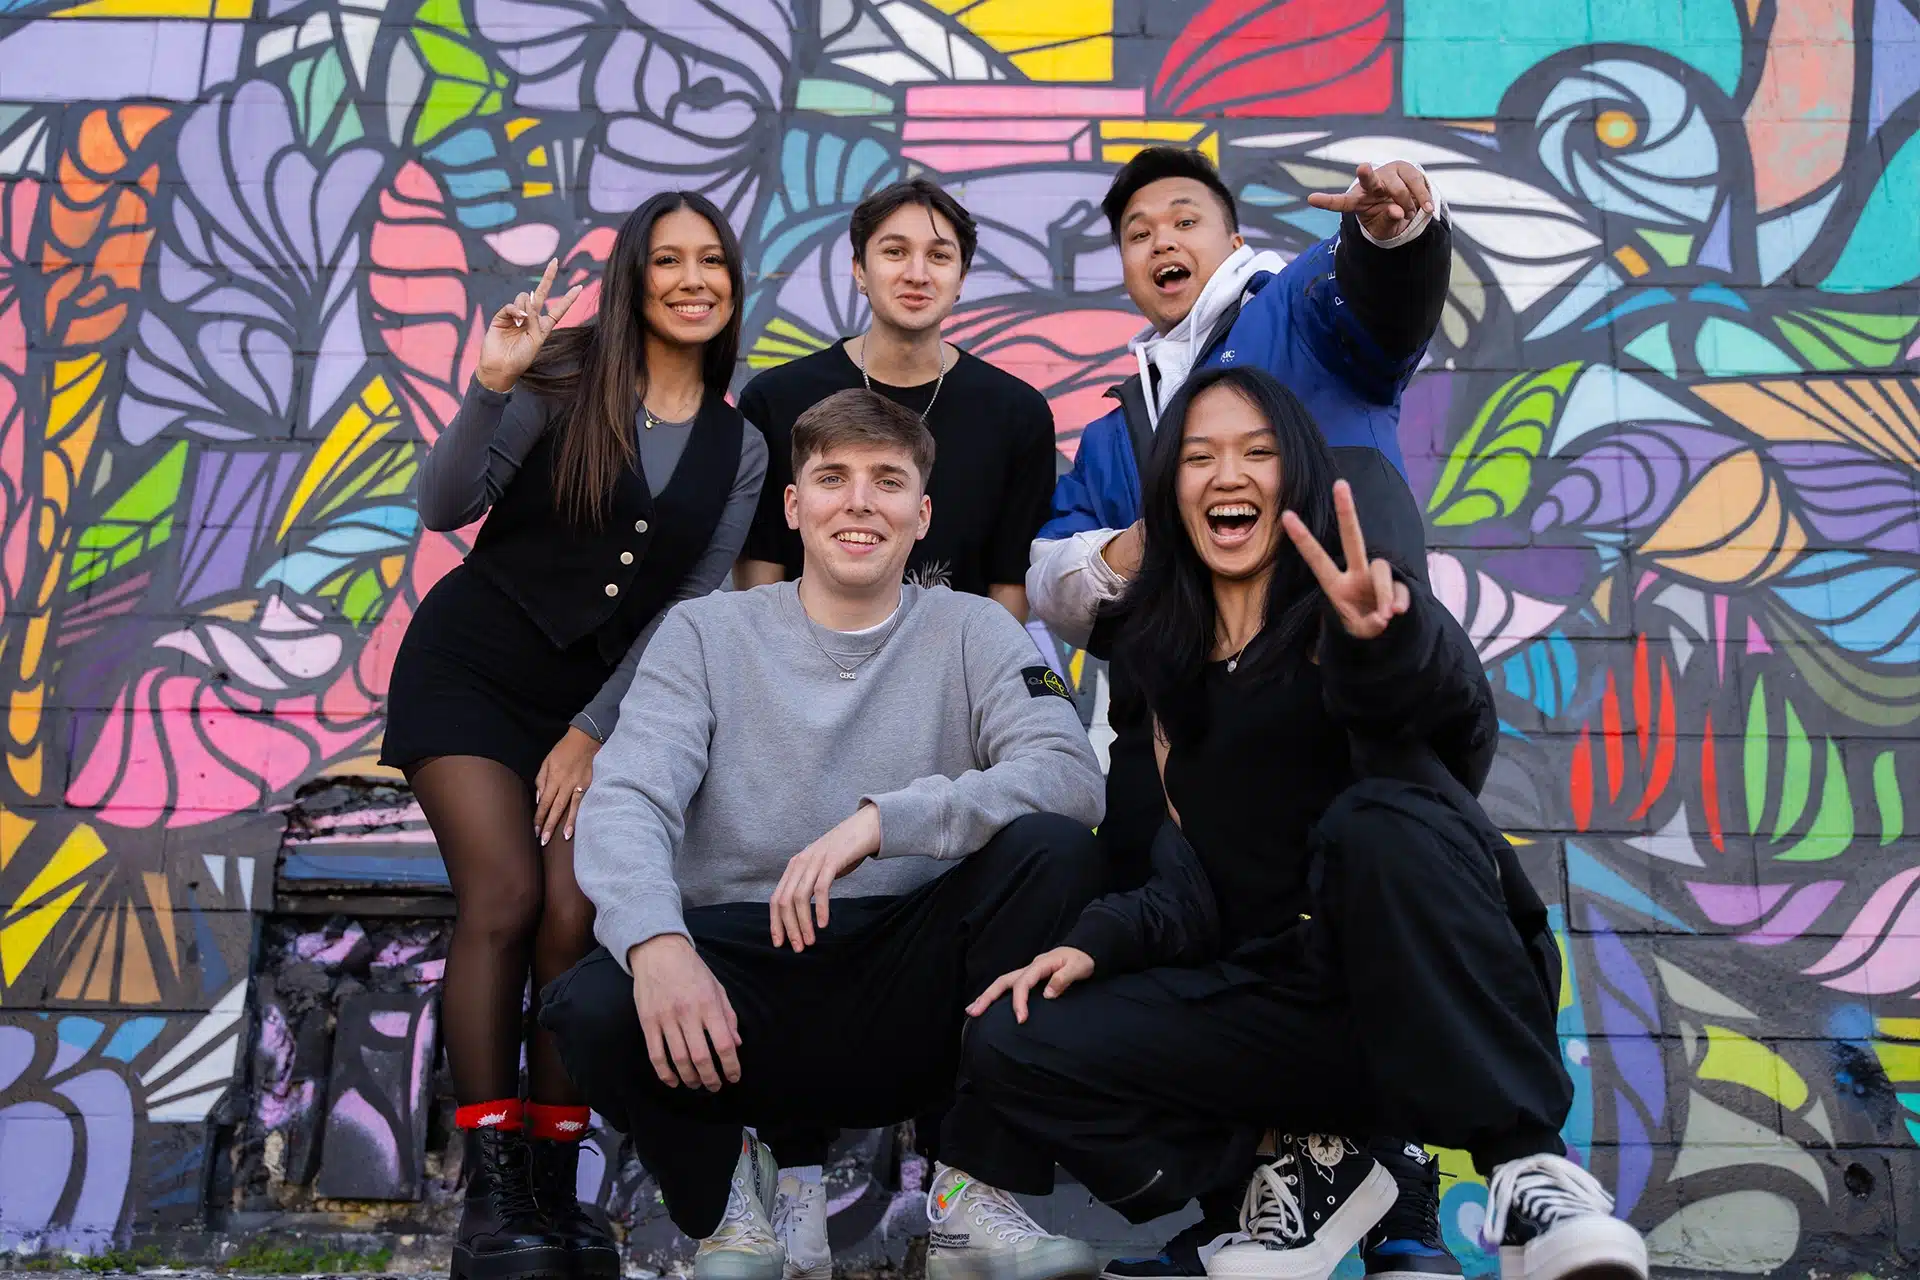 Outlaws entertainment group of gen z influencers posing in front of wall mural